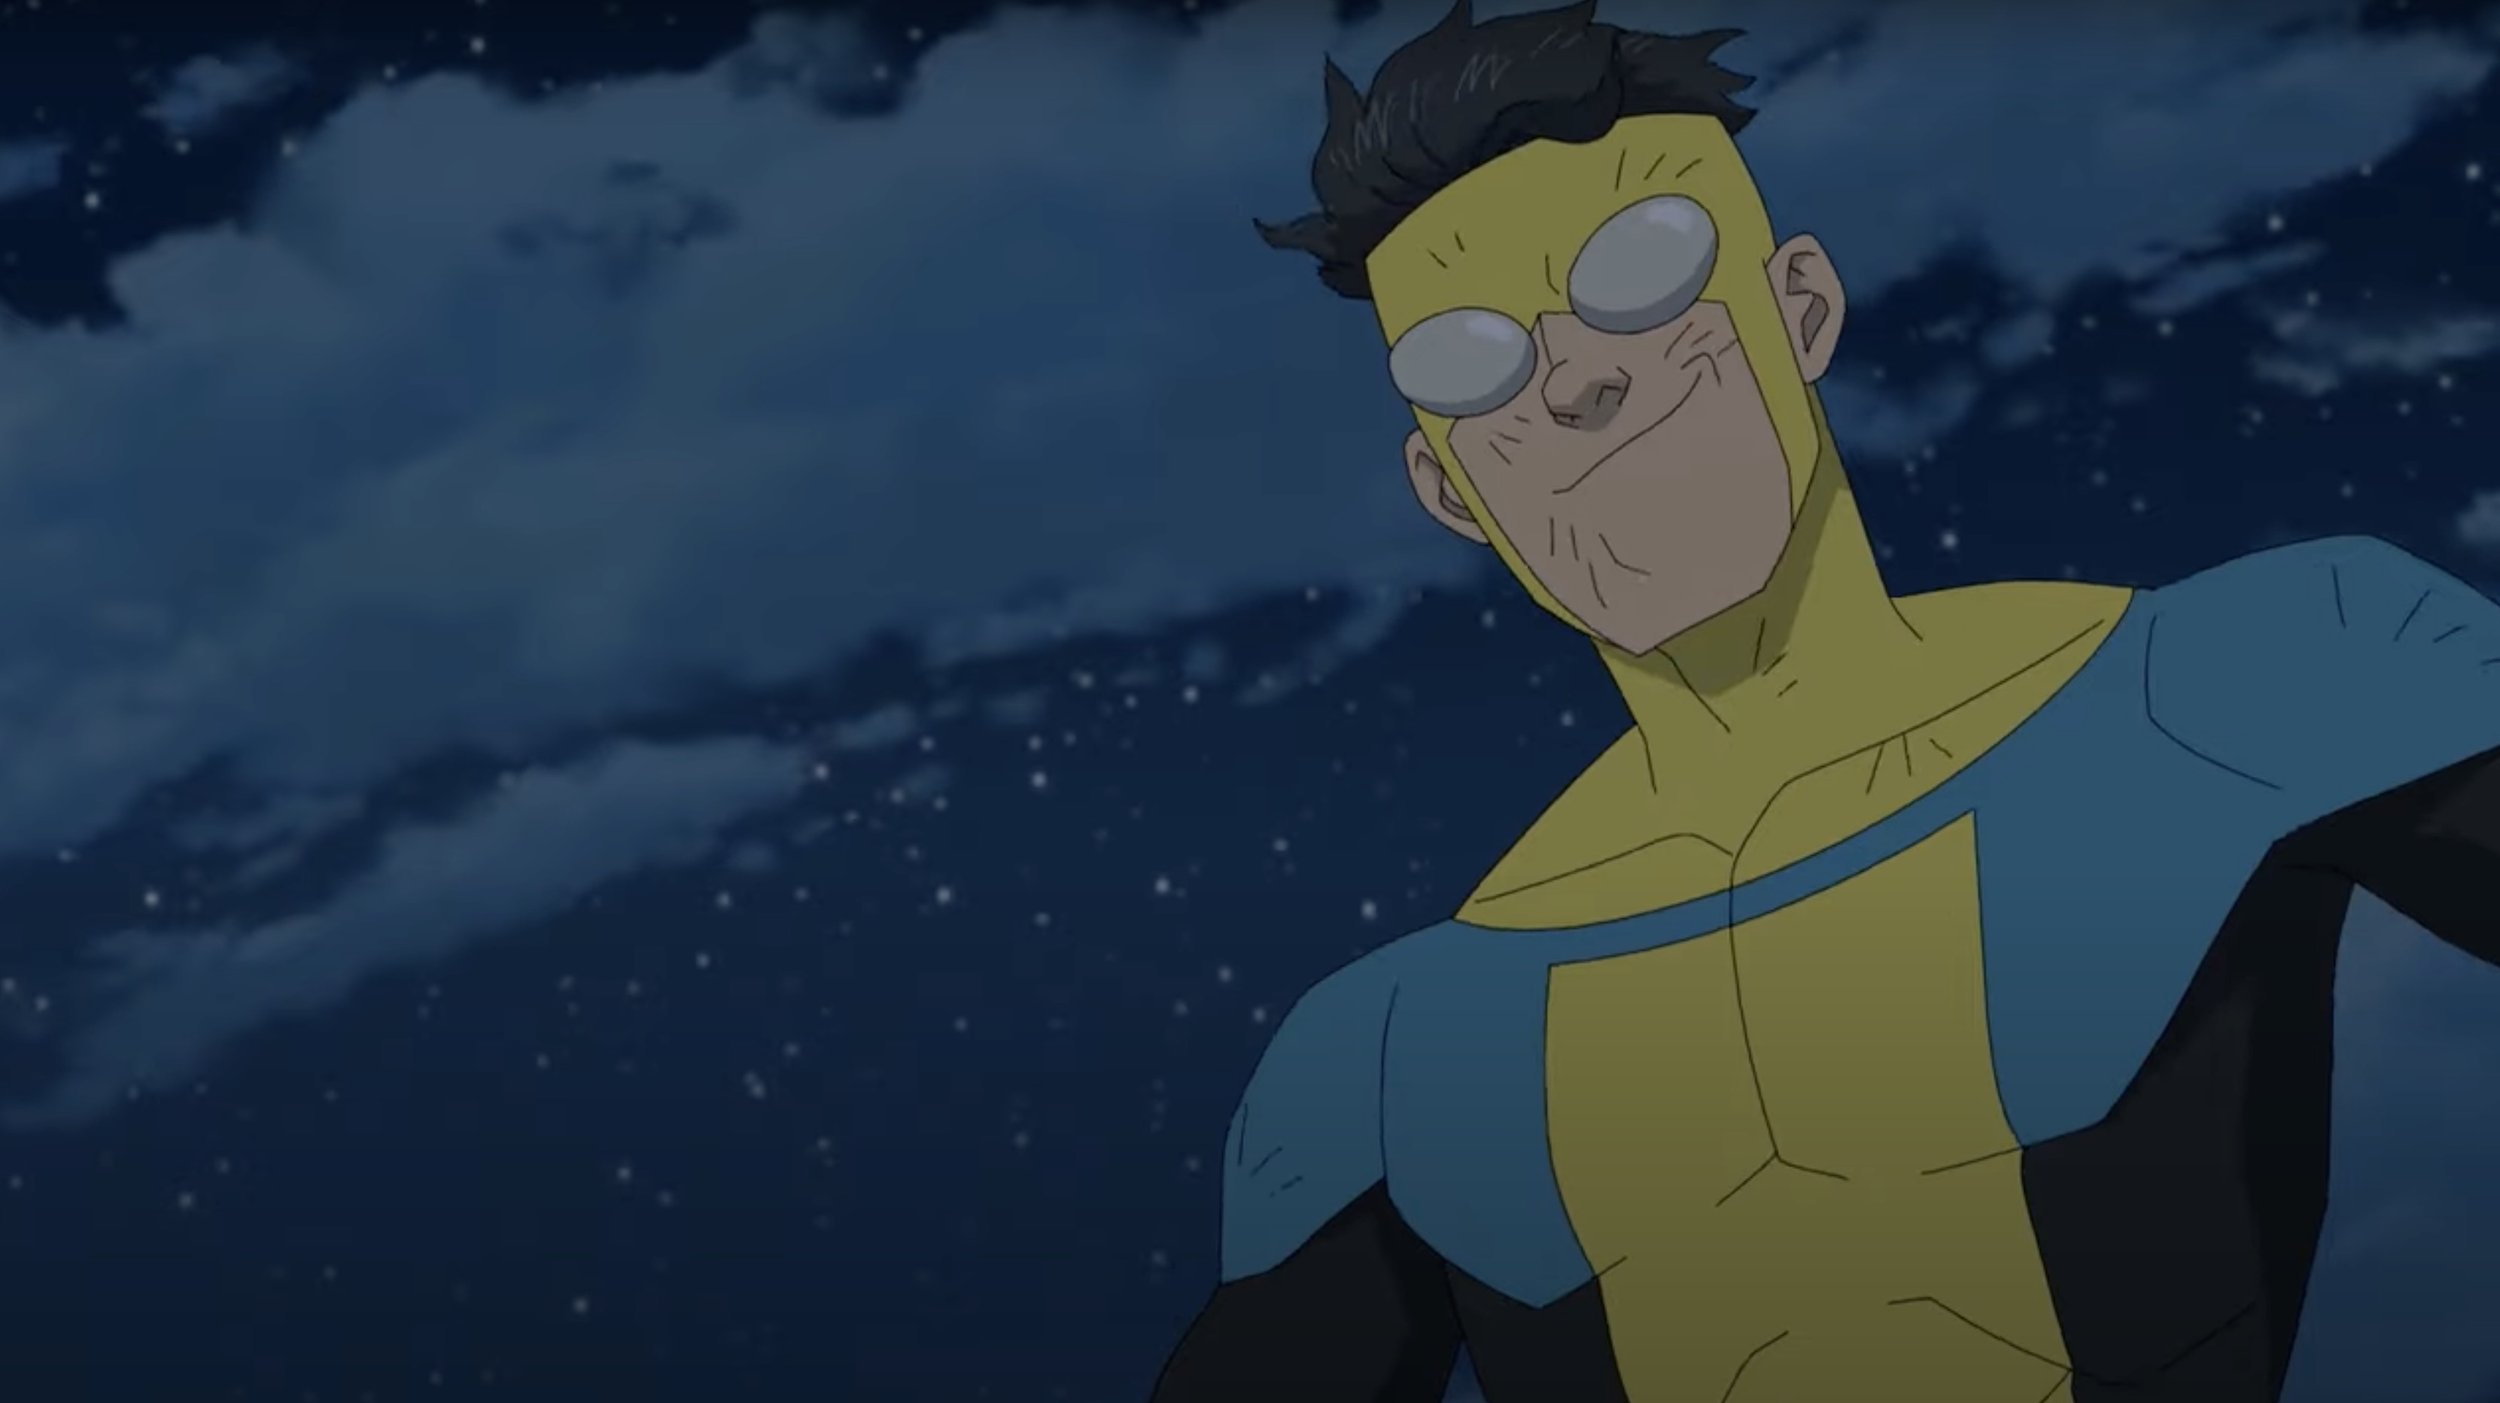 Invincible season 3 confirmed, coming sooner than expected